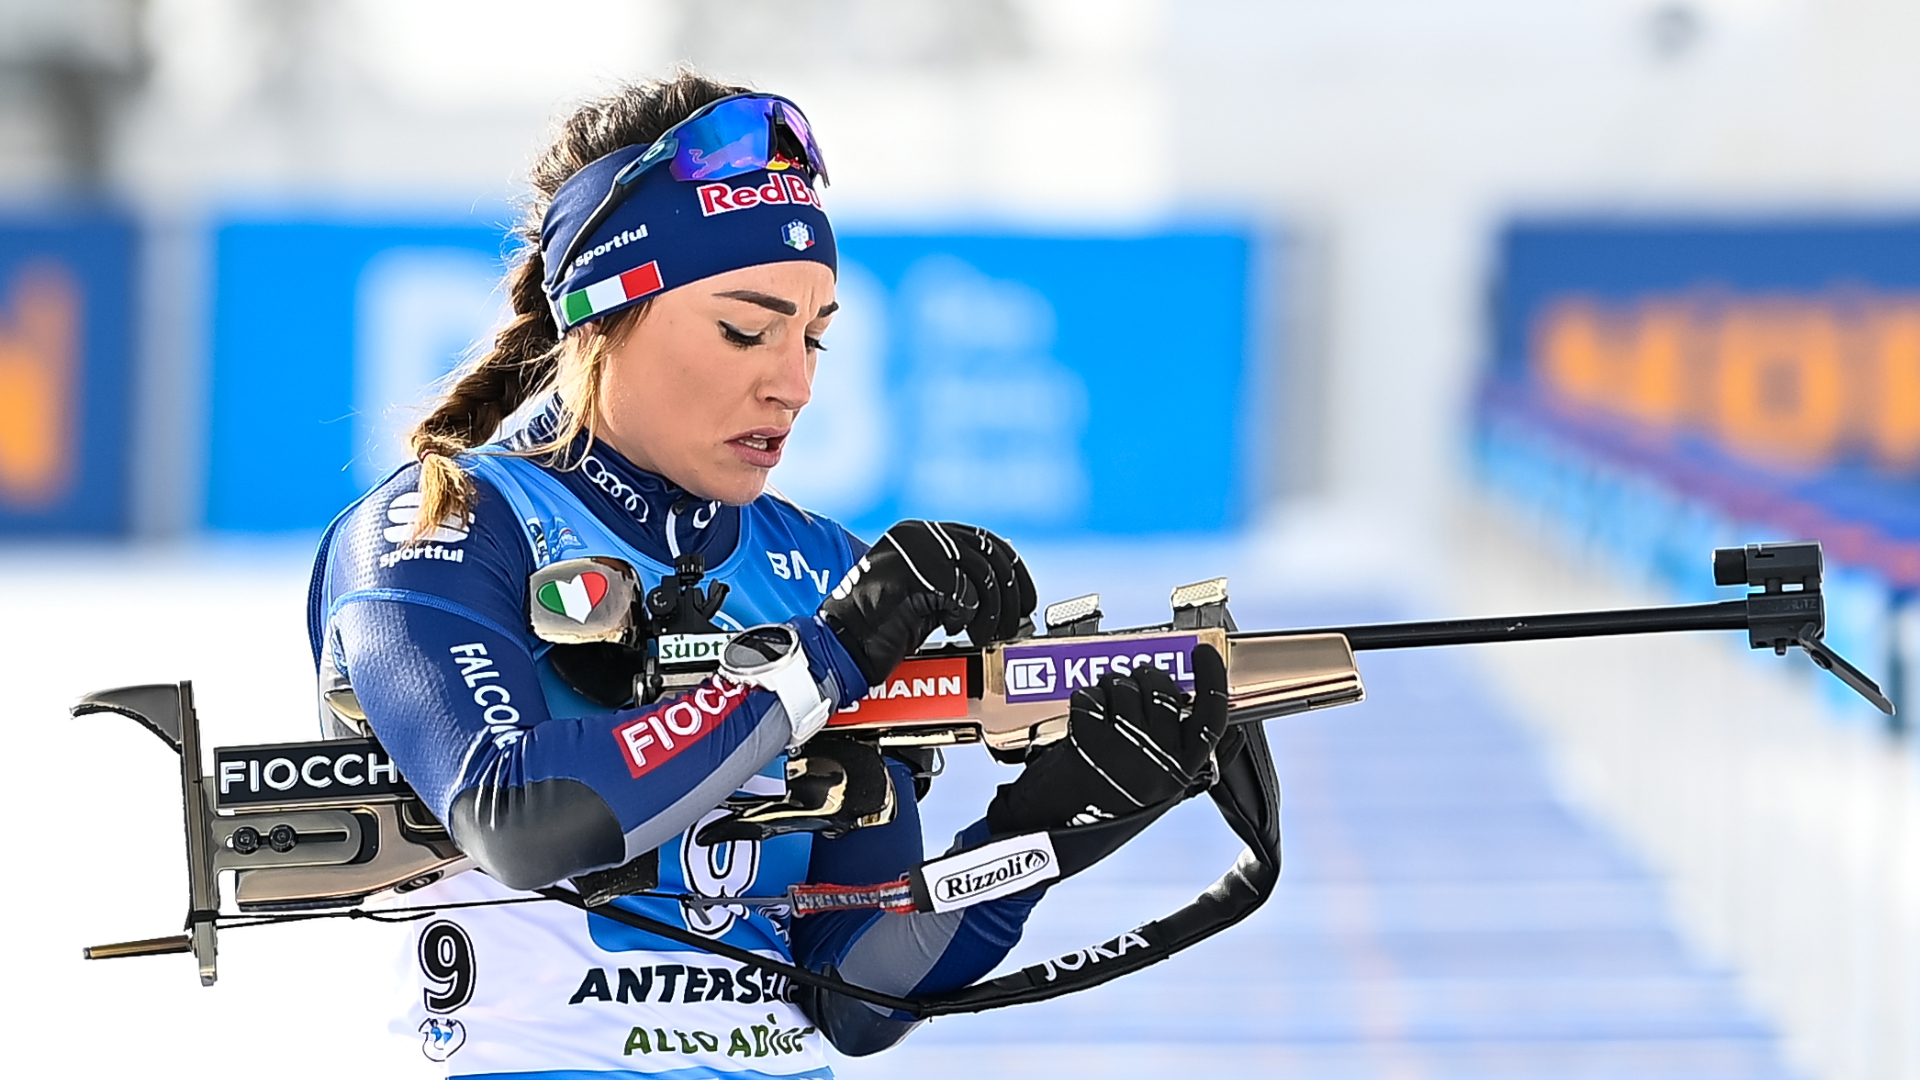 BIATHLON. A WORLD CHAMPIONSHIP WITHOUT MEDALS FOR THE ITALIAN NATIONAL TEAM